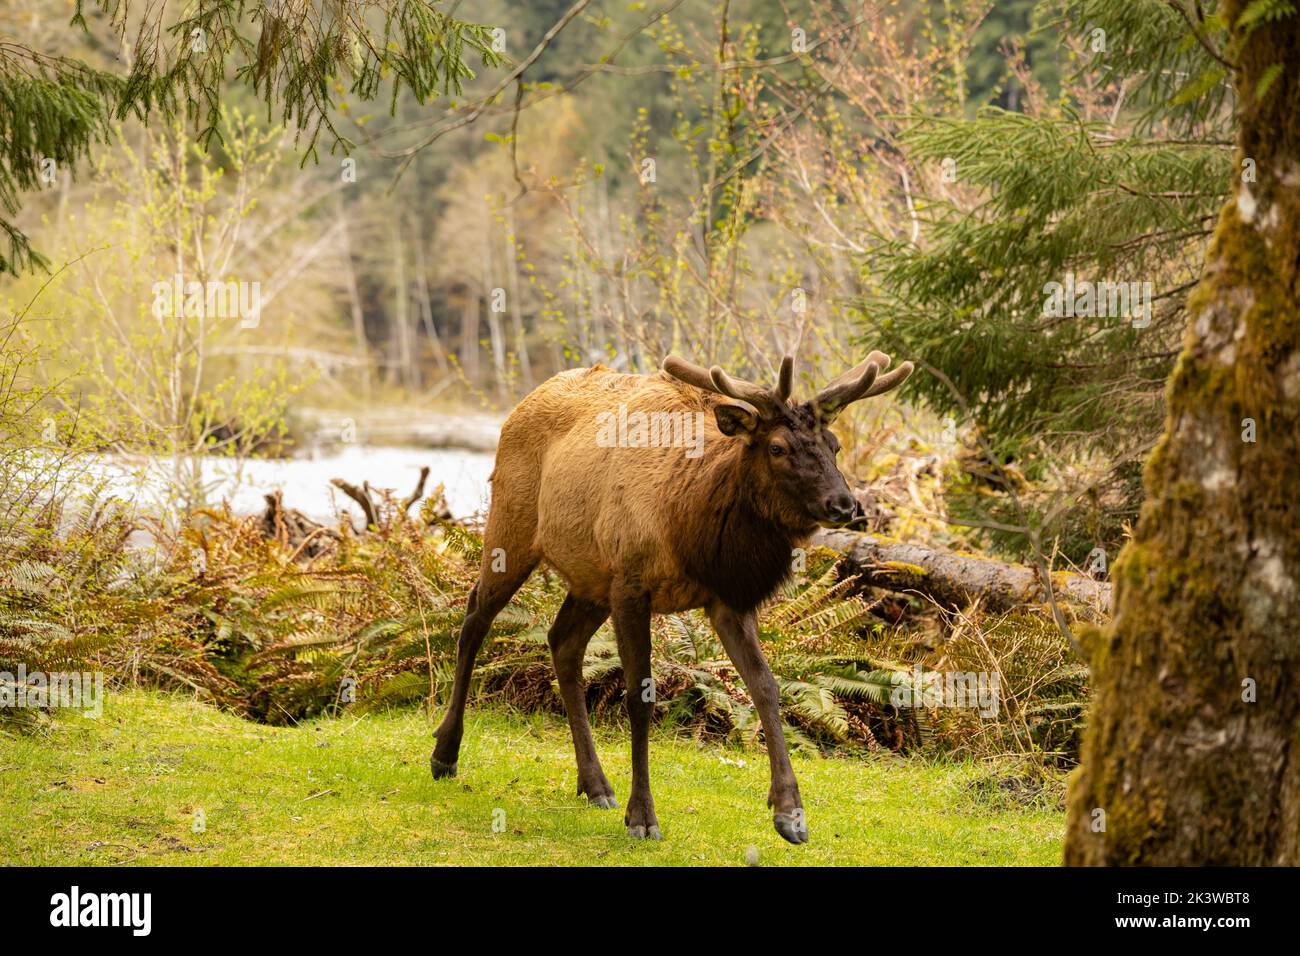 WA22091-00...WASHINGTON - Bull elk forging on the new growth at the Hoh Campground in Olympic National Park. Stock Photo